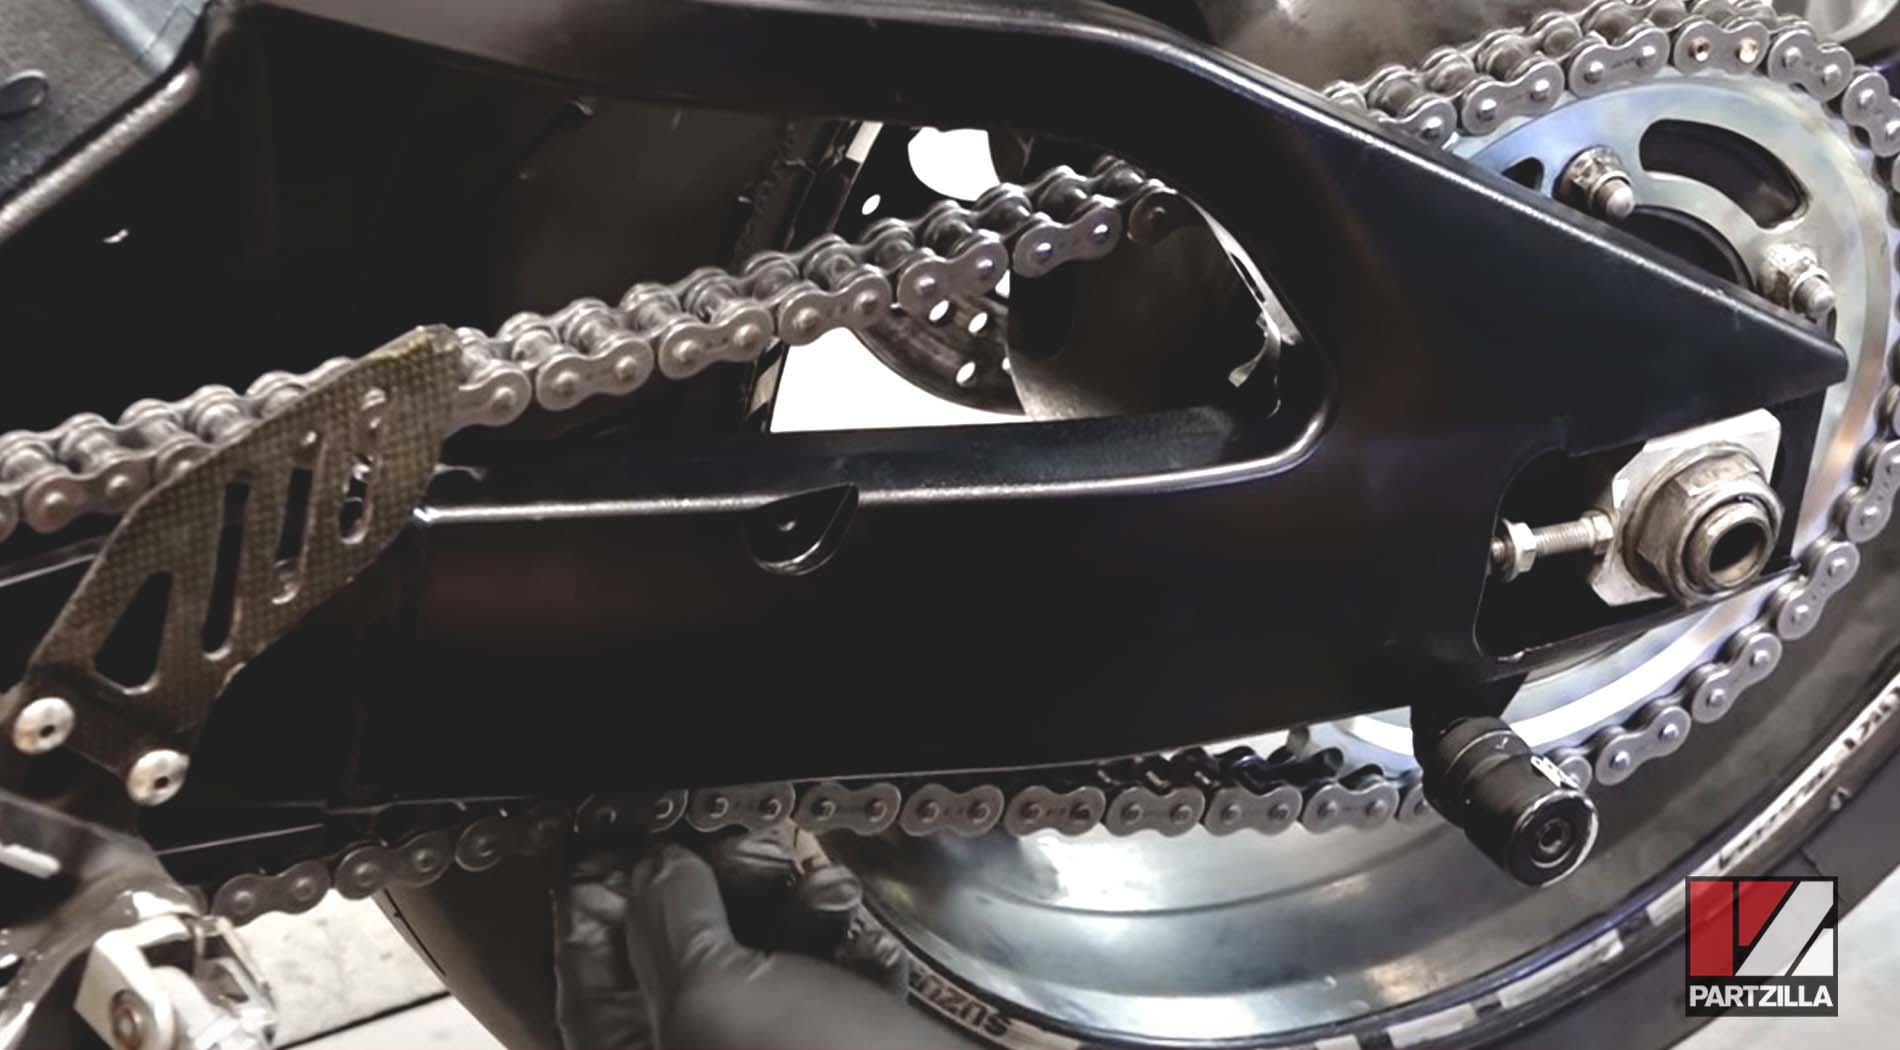 Clean motorcycle chain and sprockets